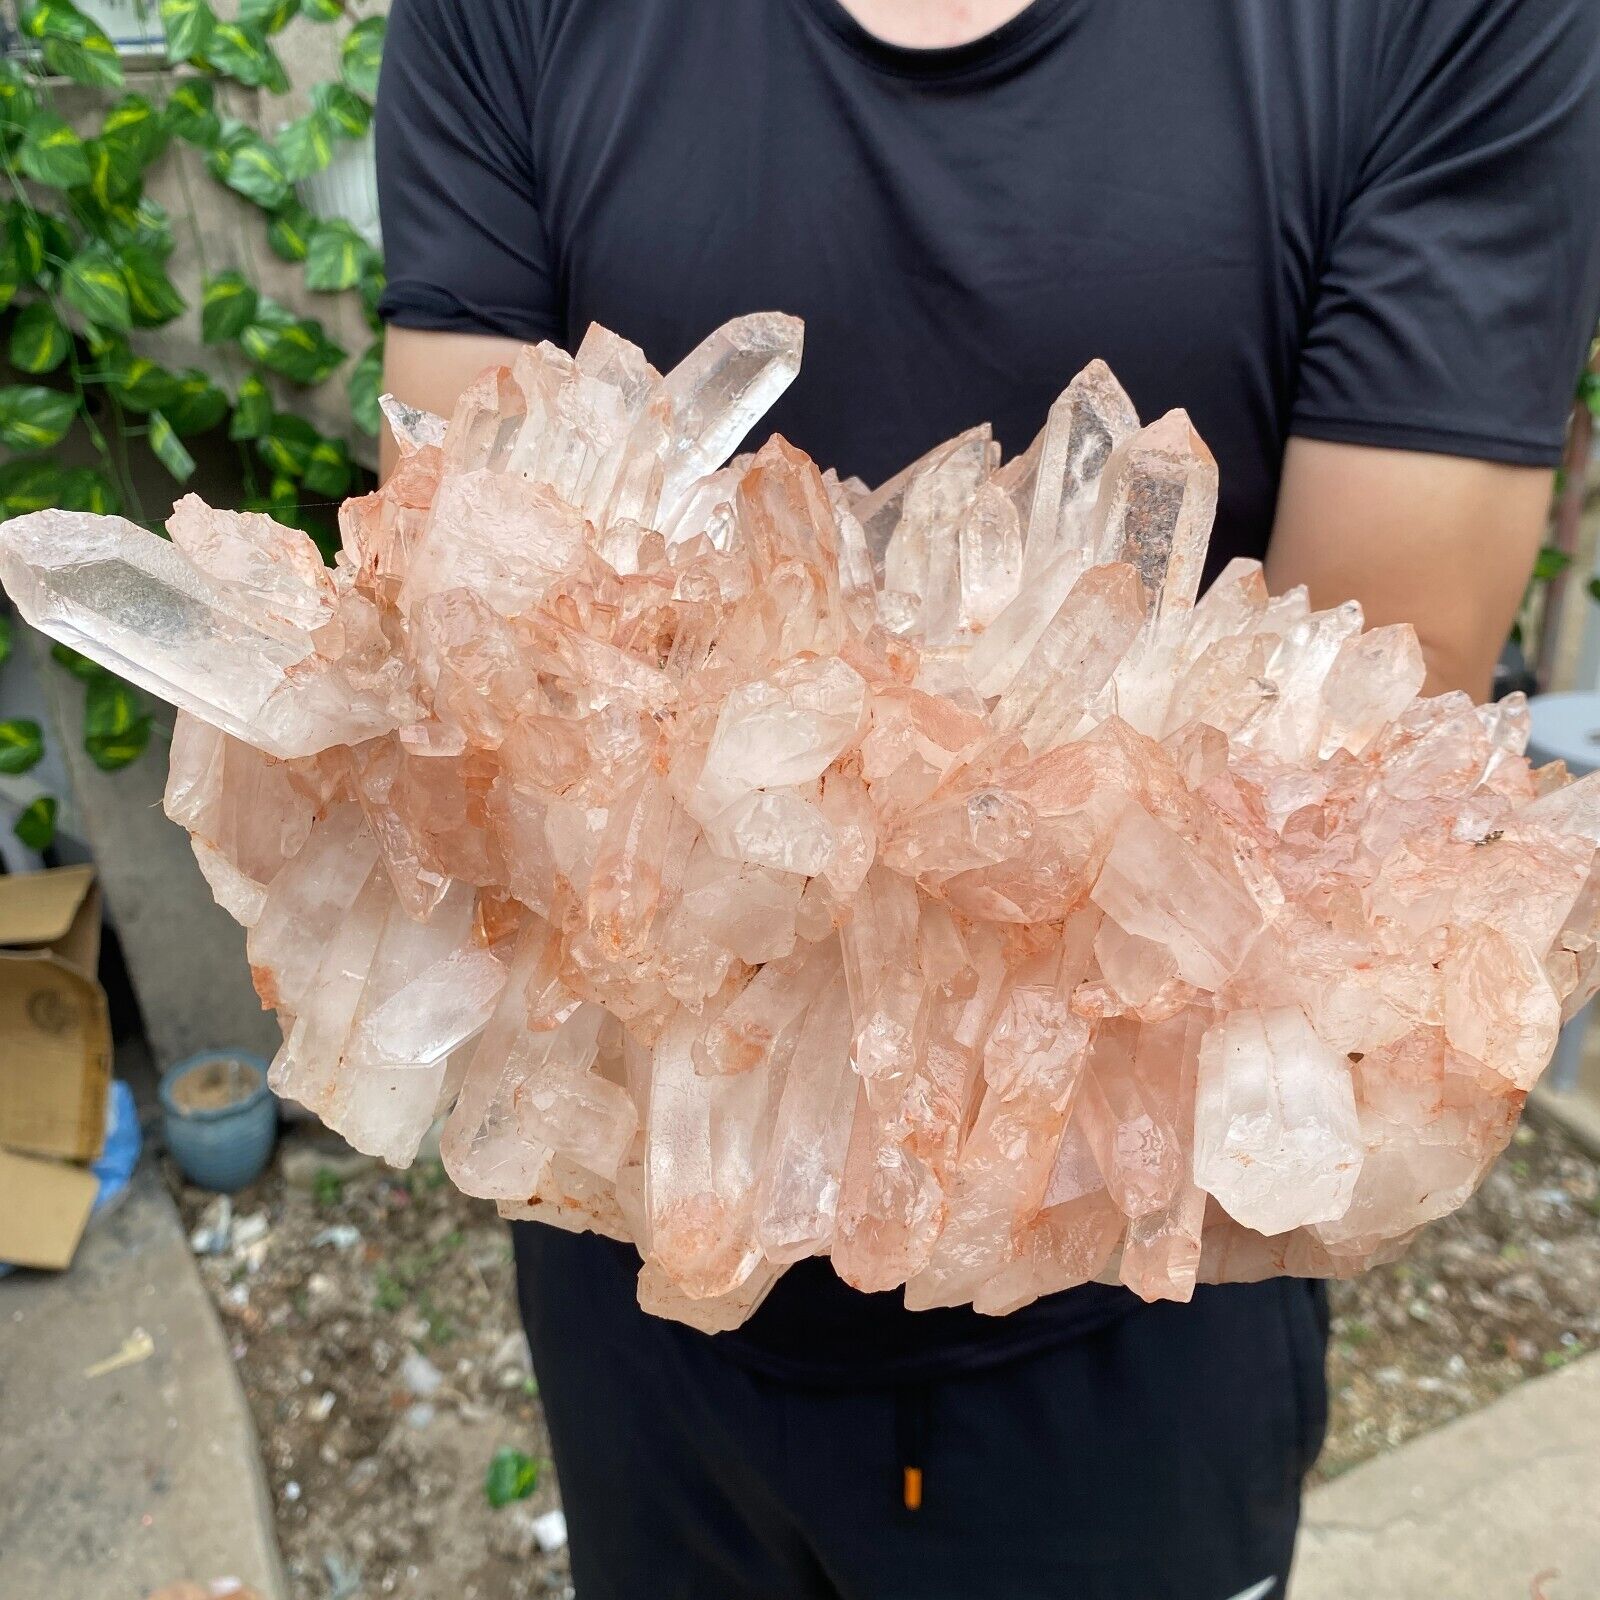 11.8lb A++Large Natural clear white Crystal Himalayan quartz cluster /mineralsls